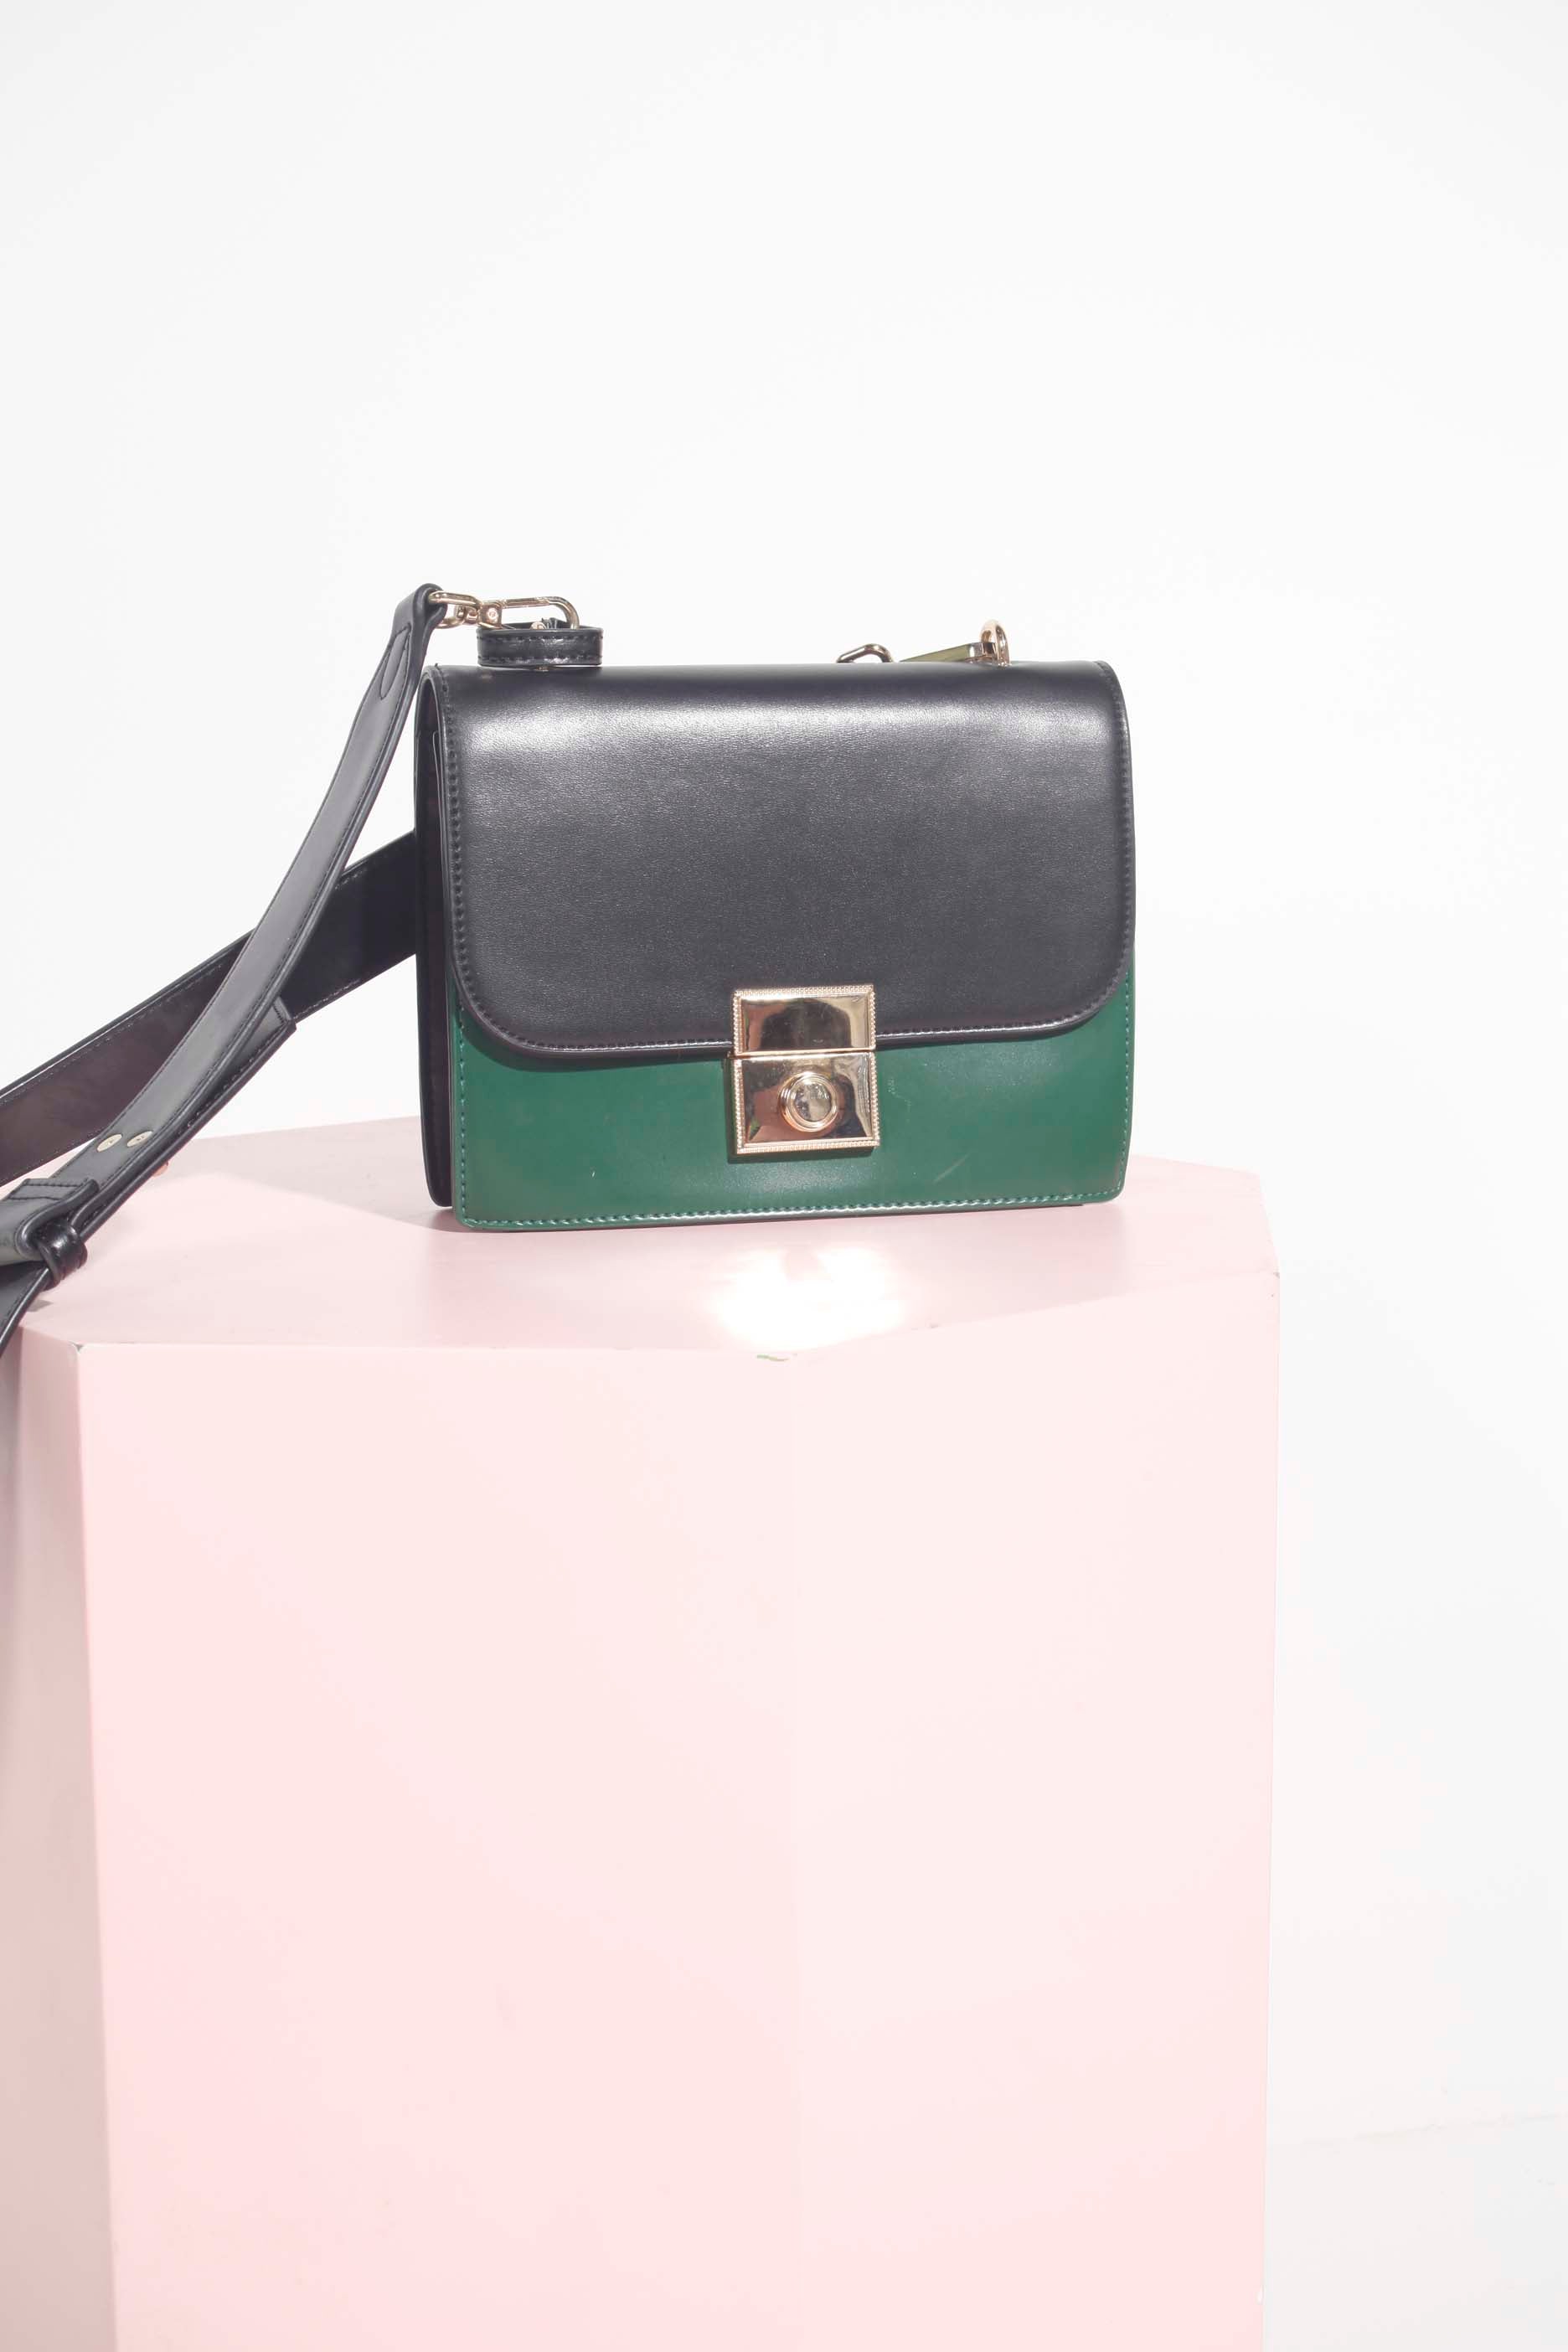 Green and Black Structured Bag